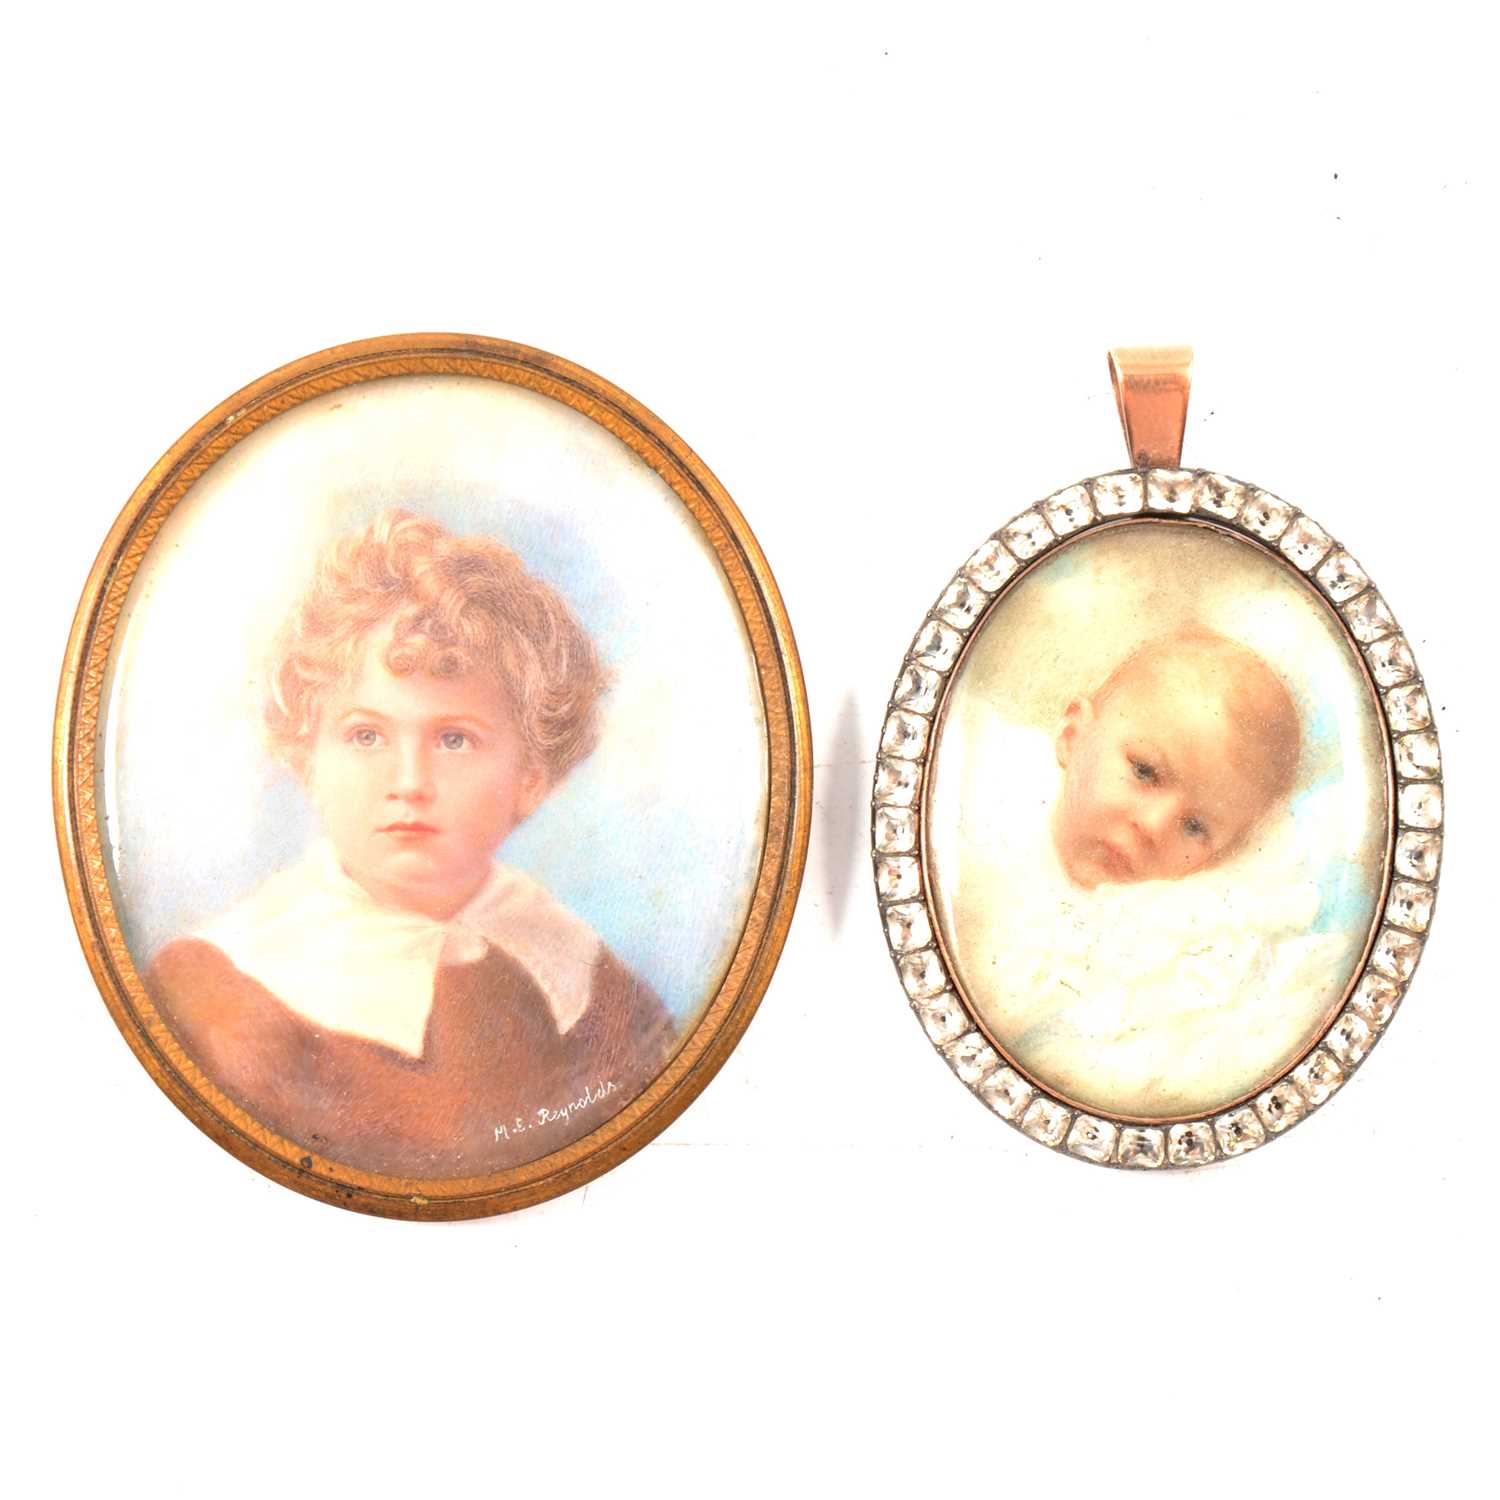 Lot 229 - Two oval portrait miniatures in frames.